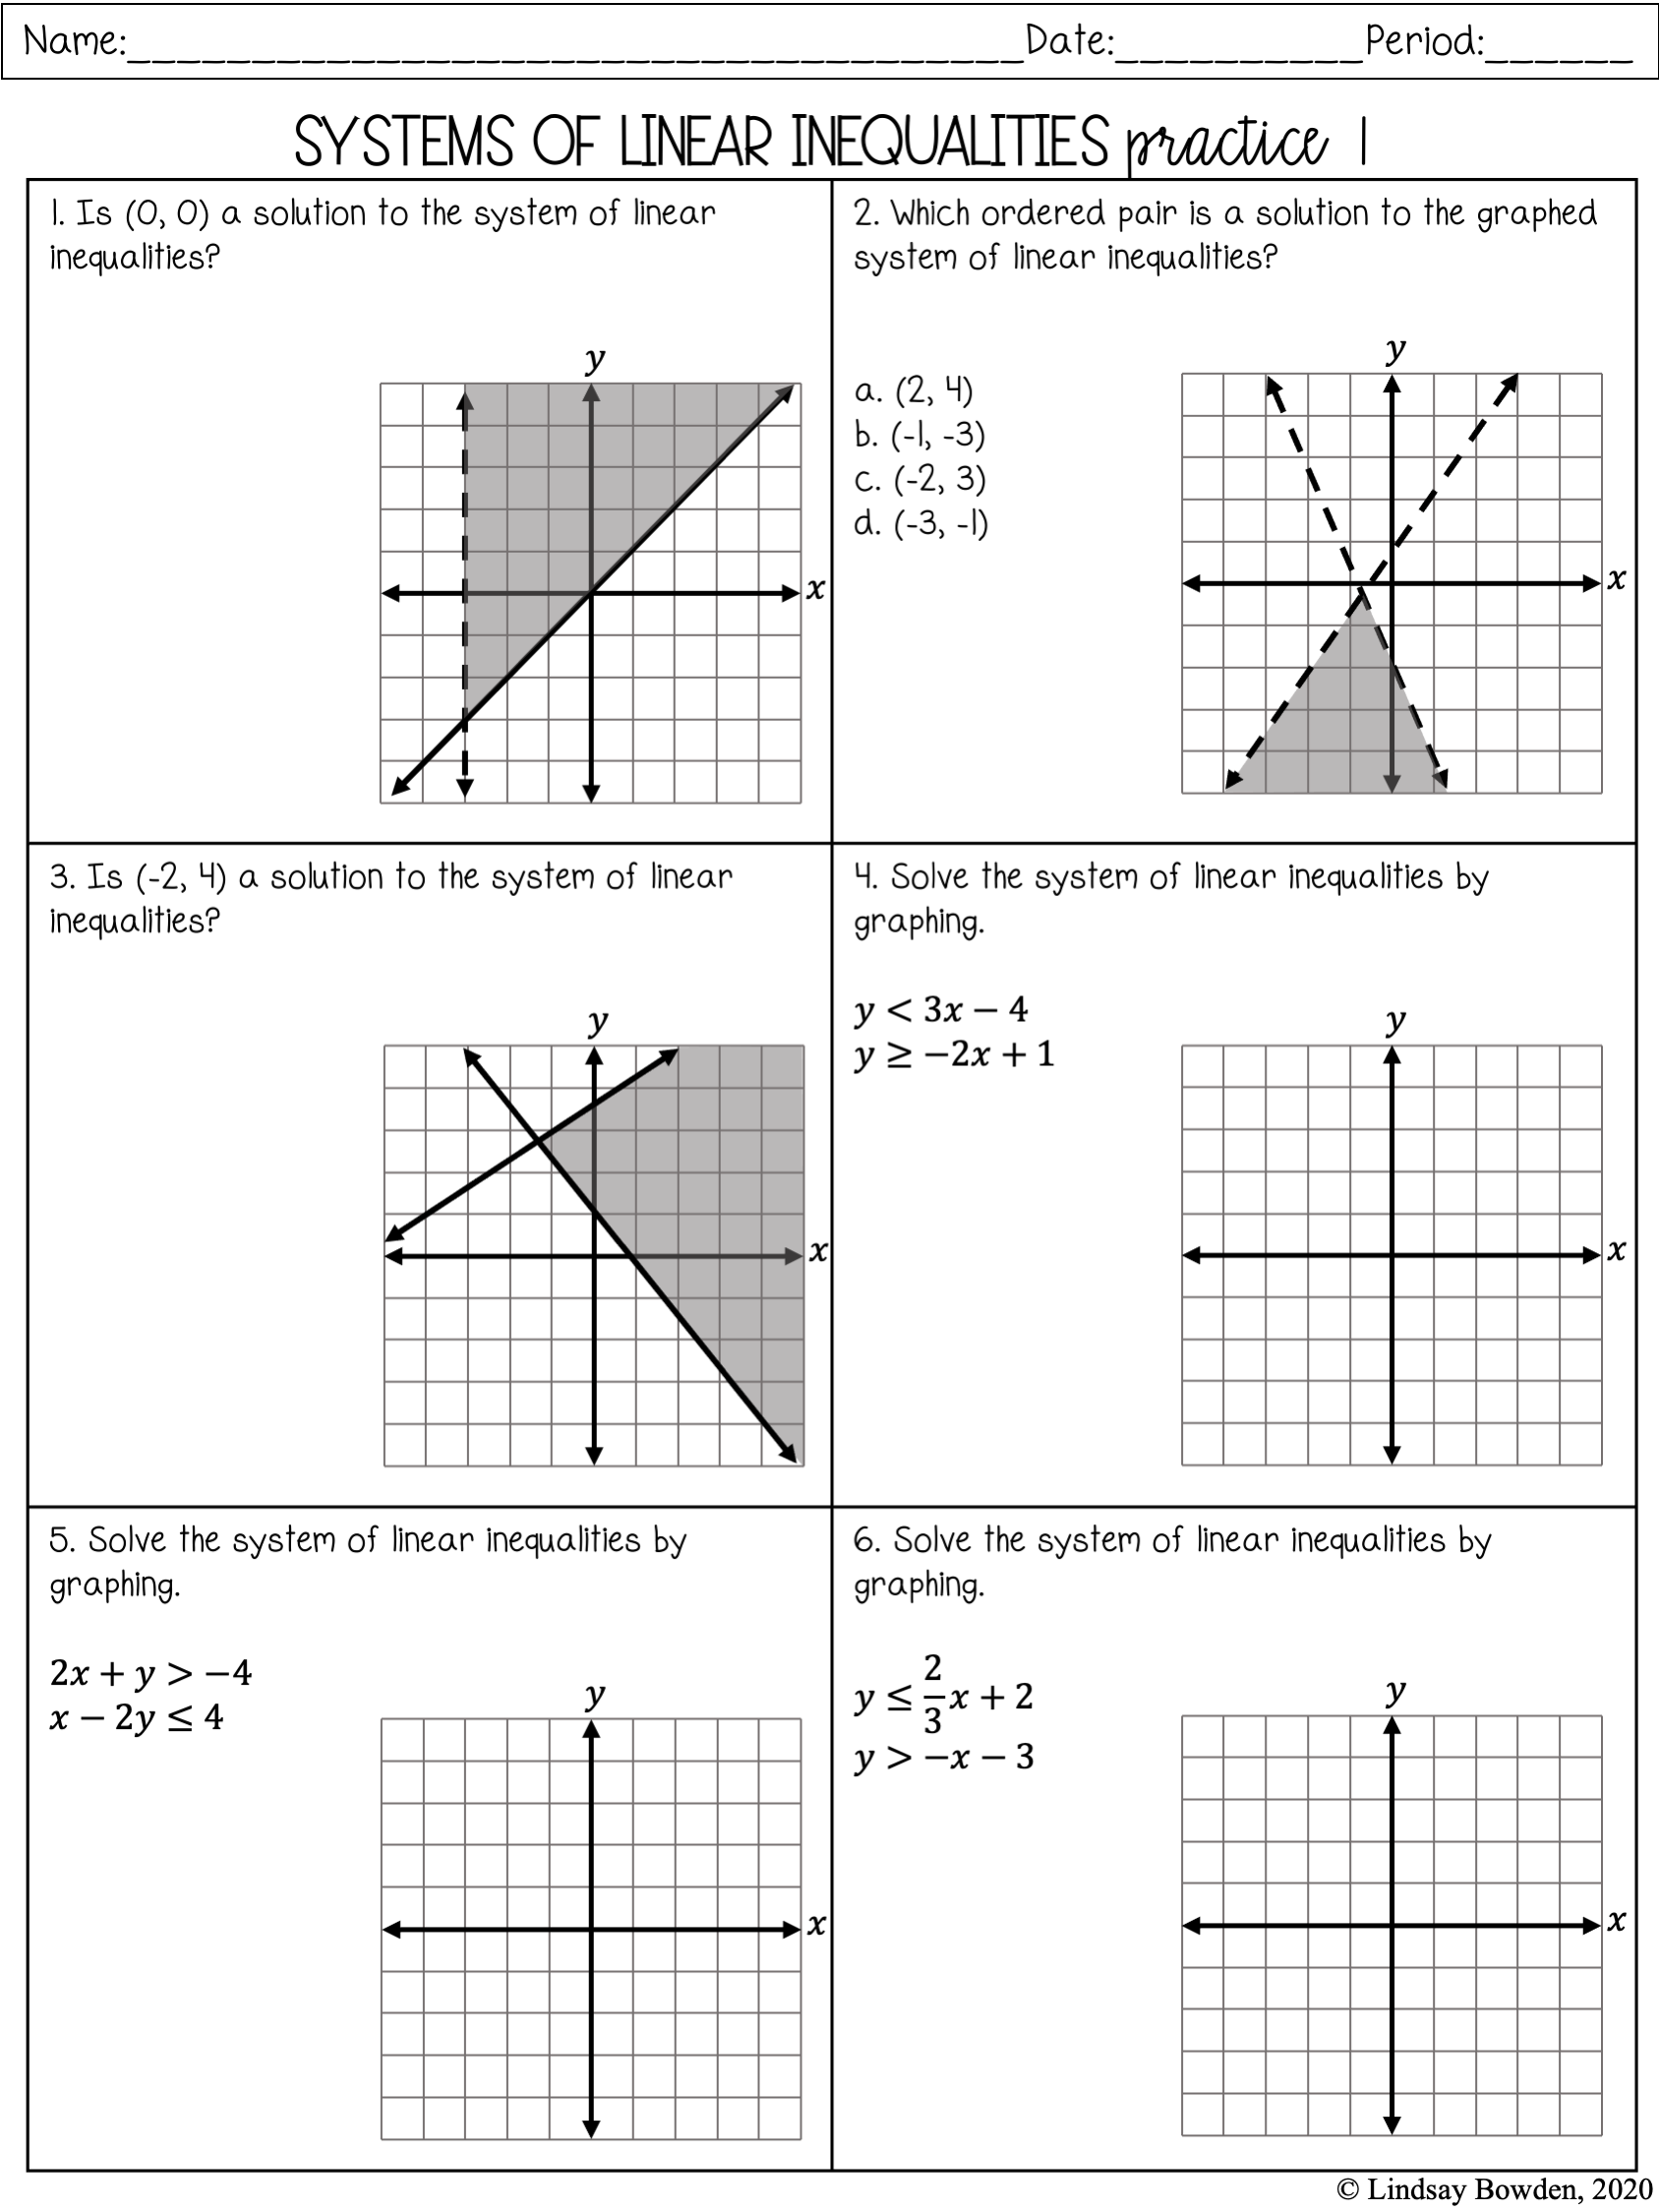 Linear Systems Notes and Worksheets - Lindsay Bowden Pertaining To Solving Linear Inequalities Worksheet